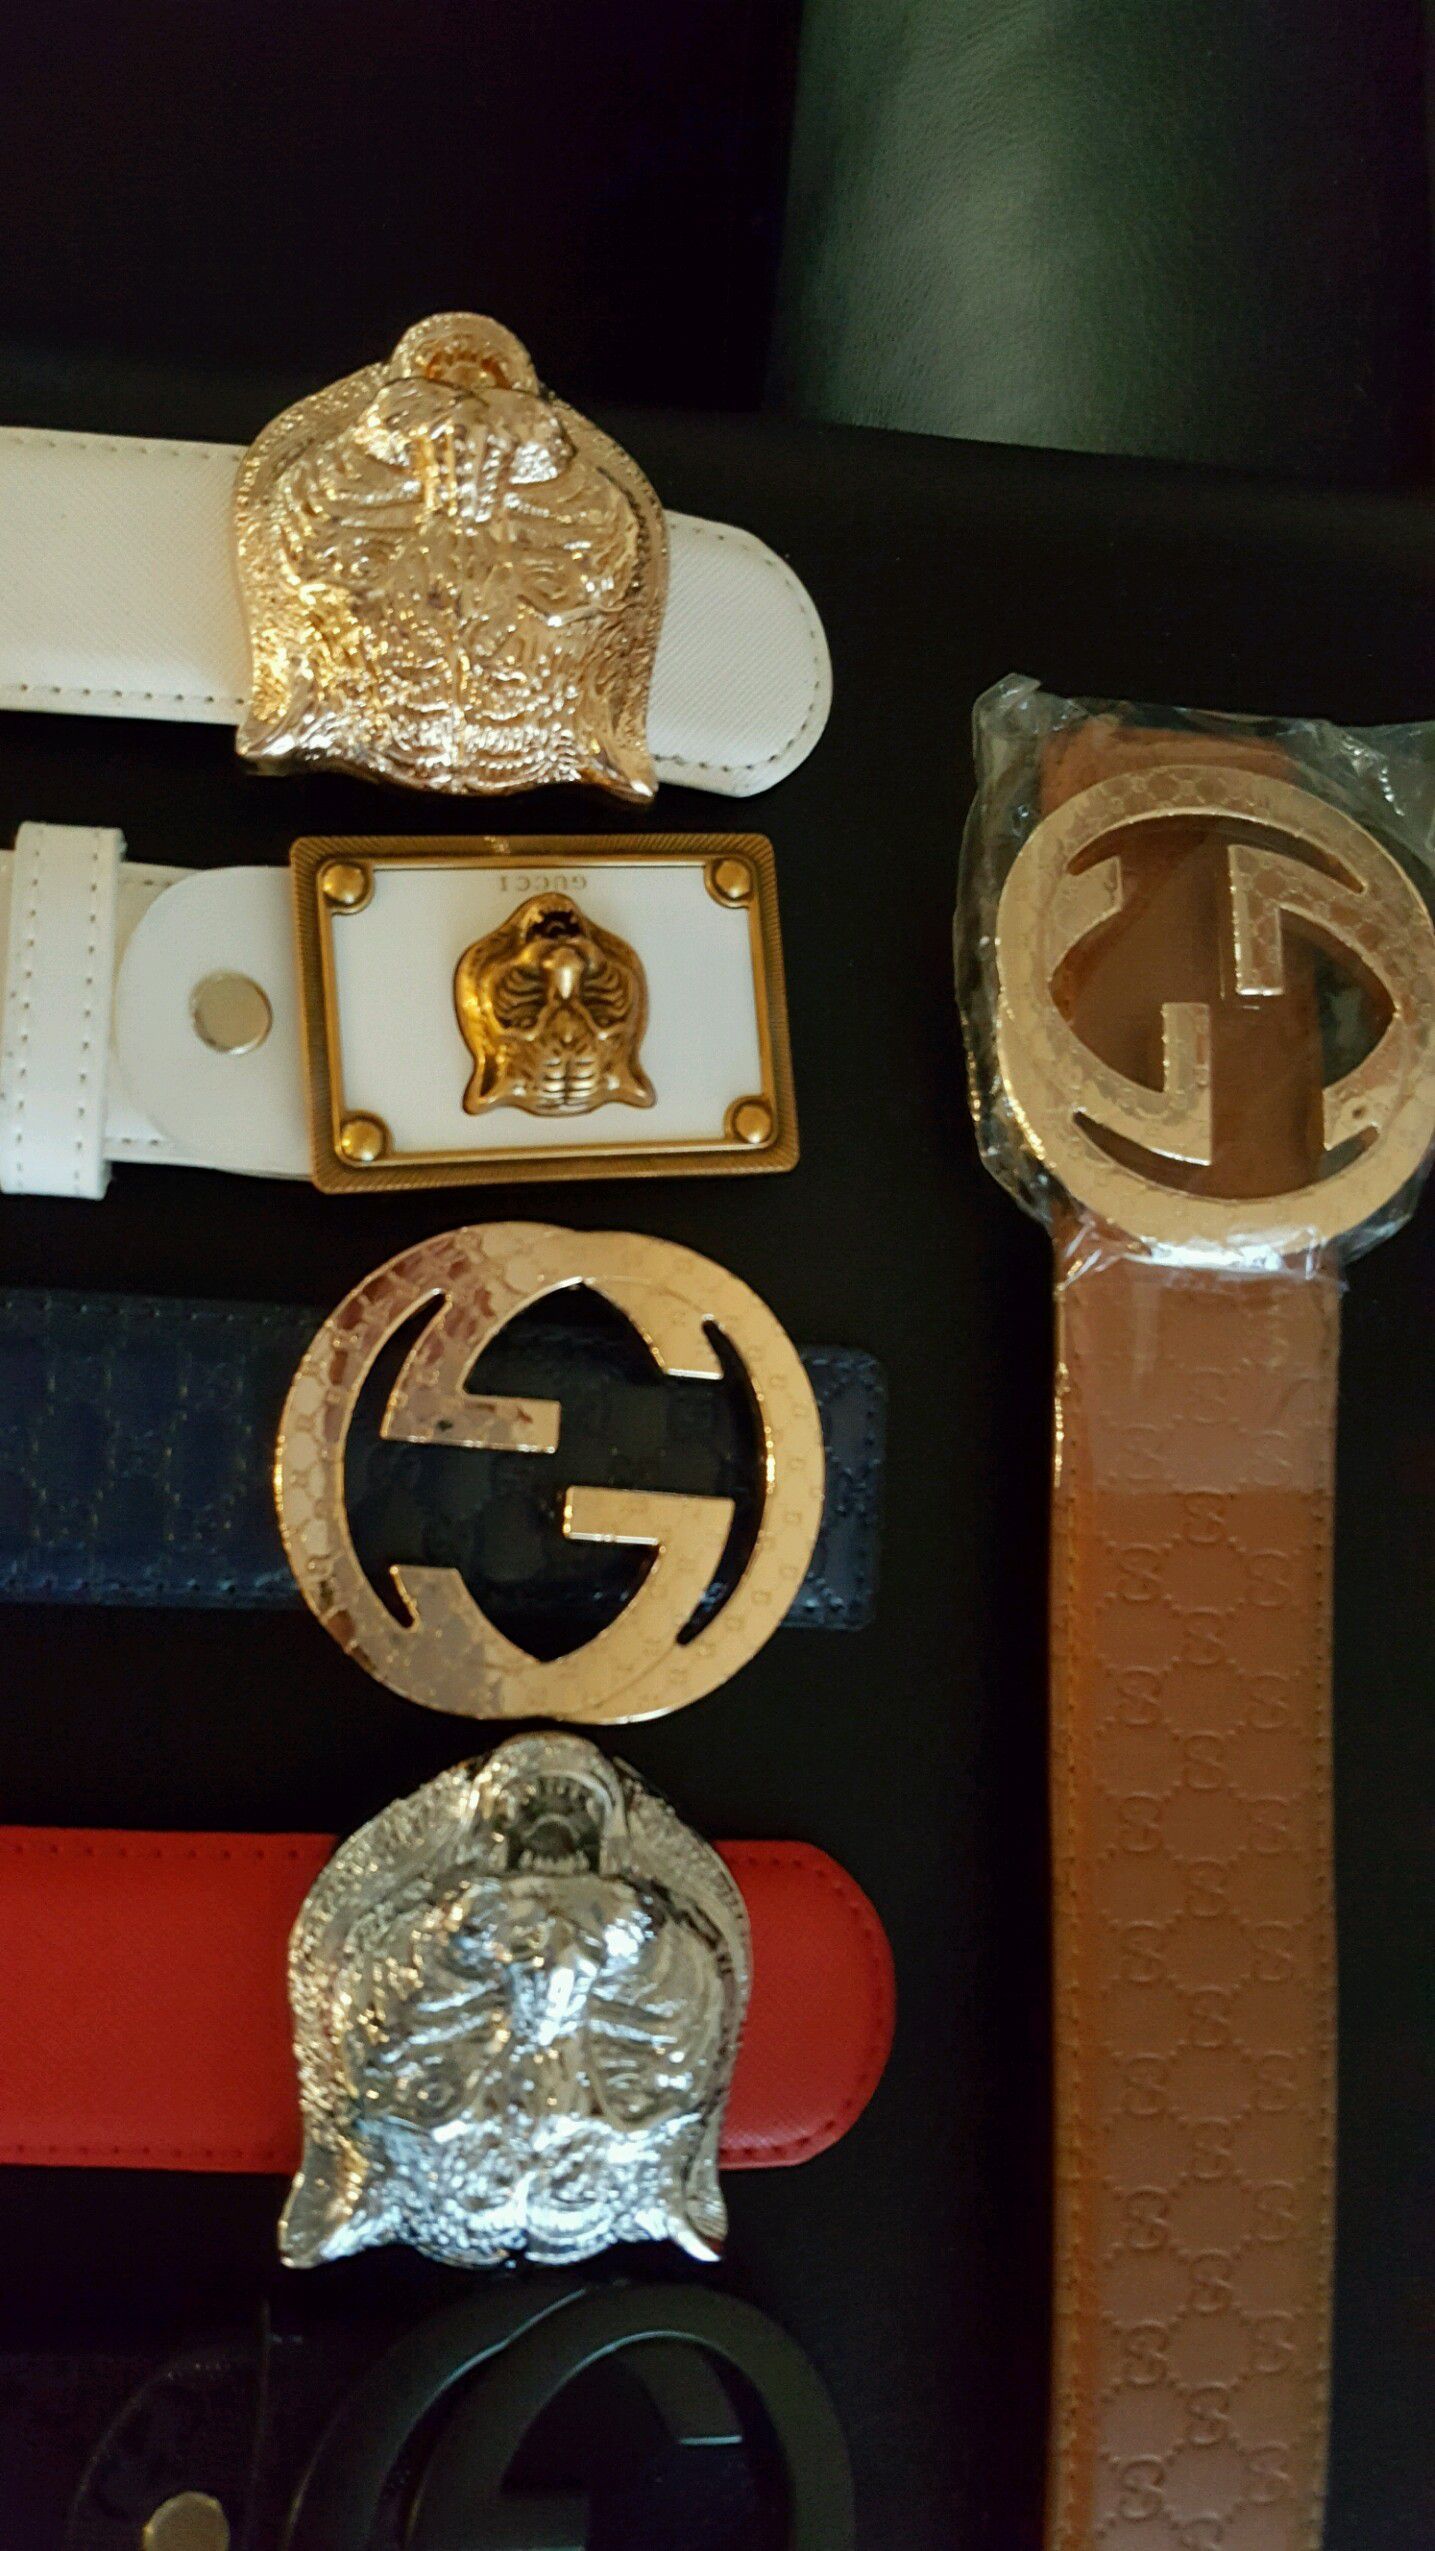 Gucci Louis Vuitton And More Designer Belts for Sale in Moorestown, NJ -  OfferUp